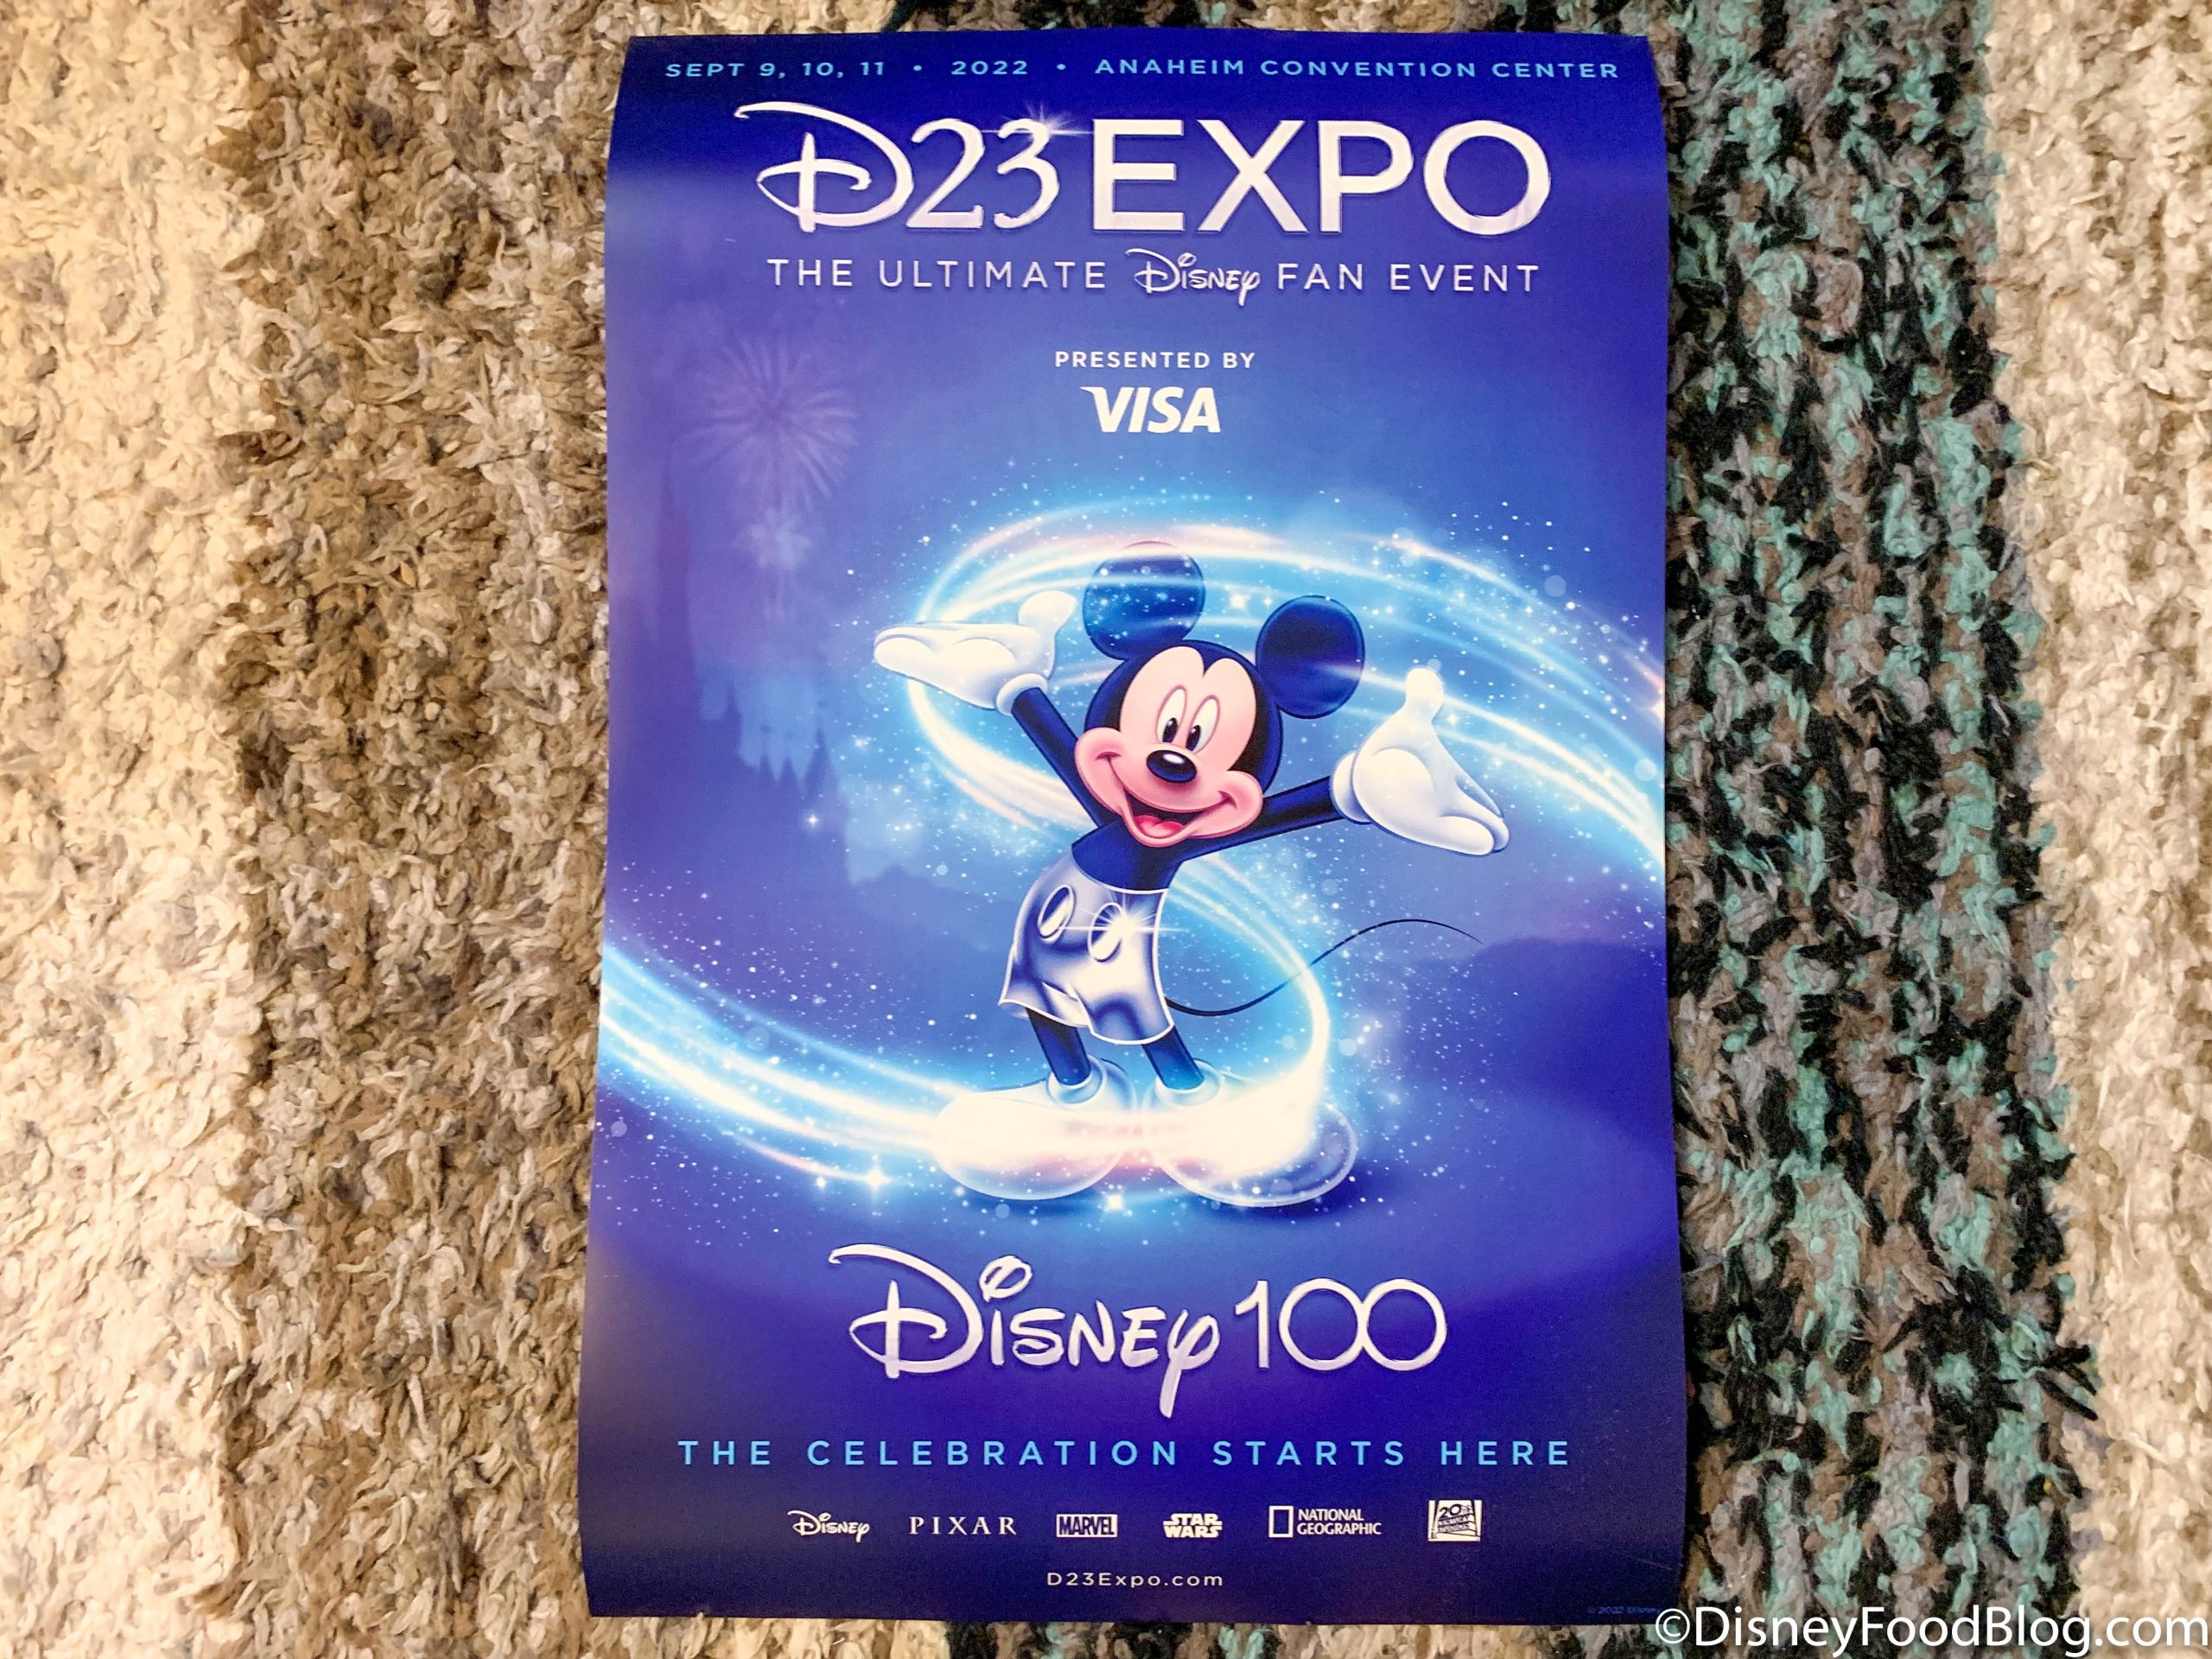 Disney DVD Frequently Asked Questions - UltimateDisney.com